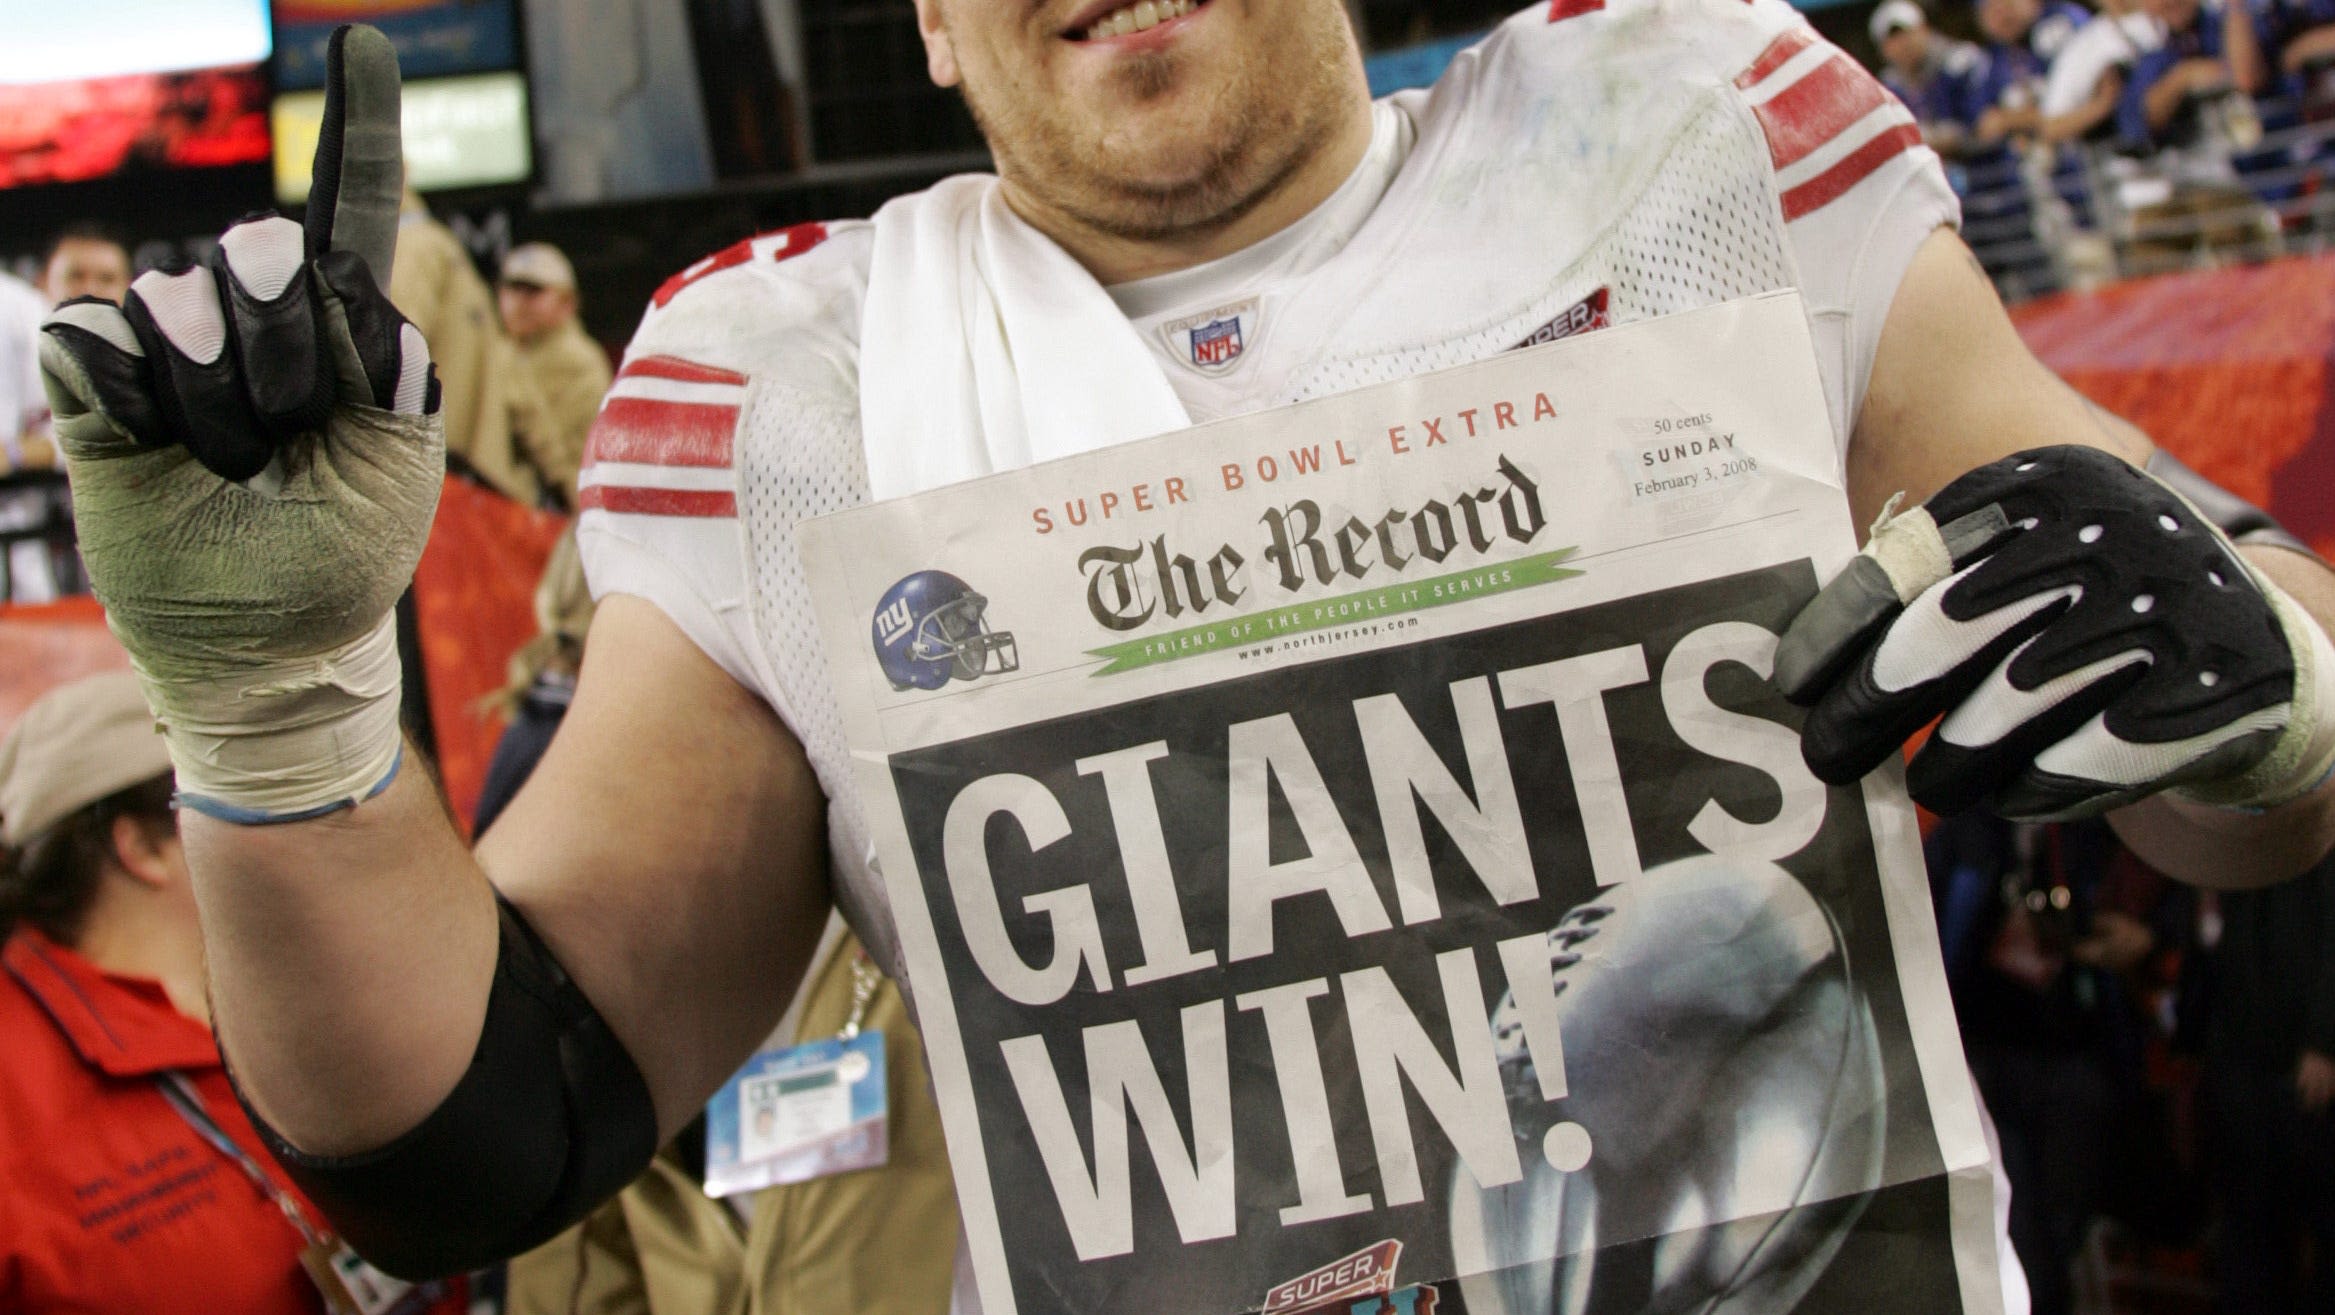 Big Blue reunion: NY Giants legend Chris Snee returns to organization as a scout